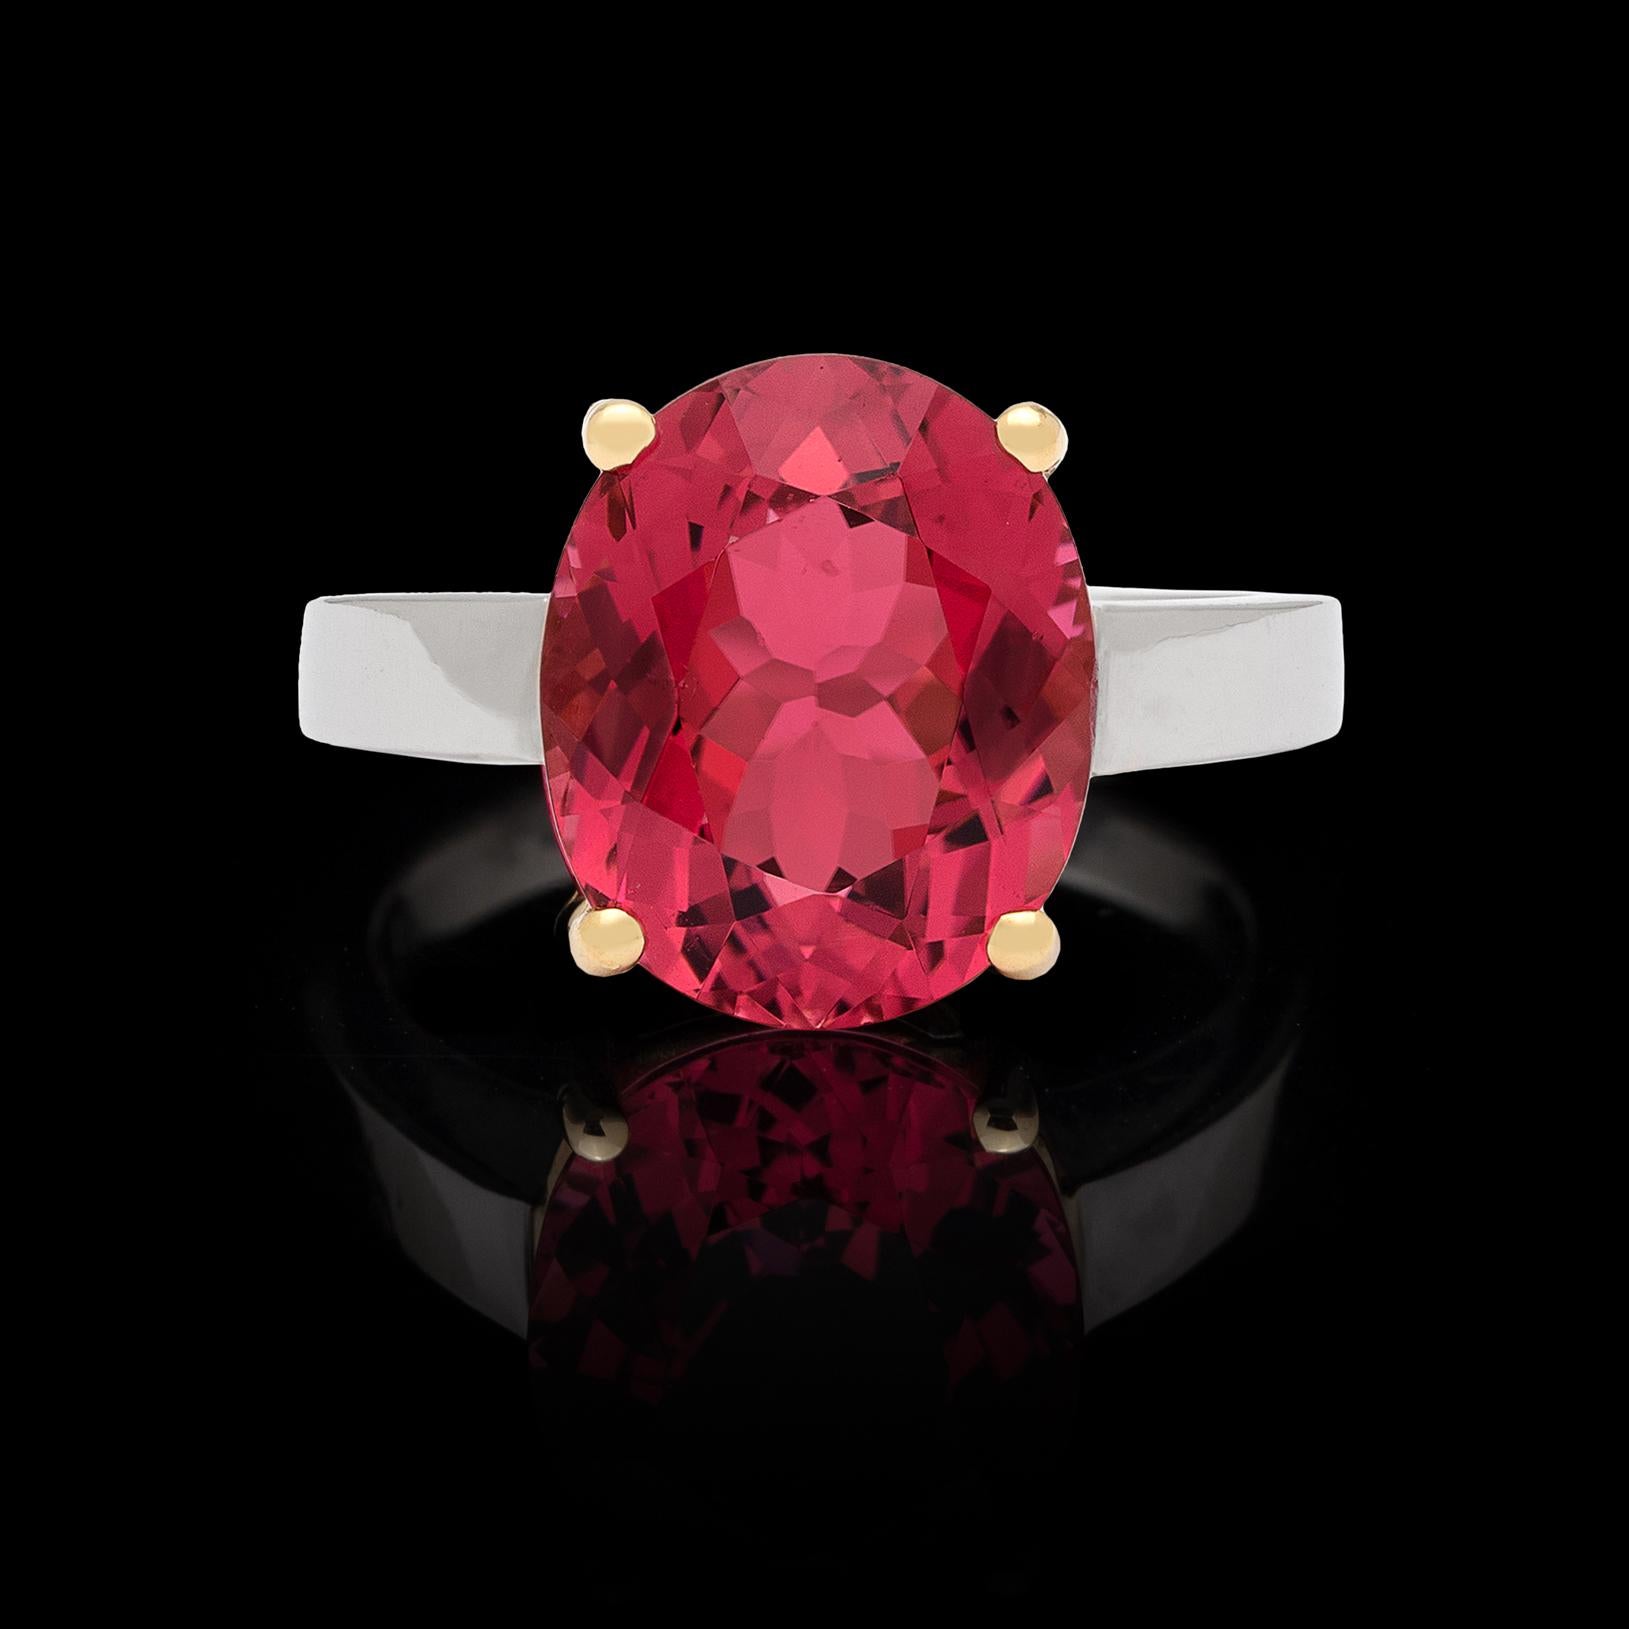 Be on trend with this orangey-pink oval tourmaline ring! Weighing 4.28 carats, and set in 18k yellow gold with a platinum mount, this unique and contemporary ring is full of life and glorious color.  The ring weighs 7.5 grams and is currently size